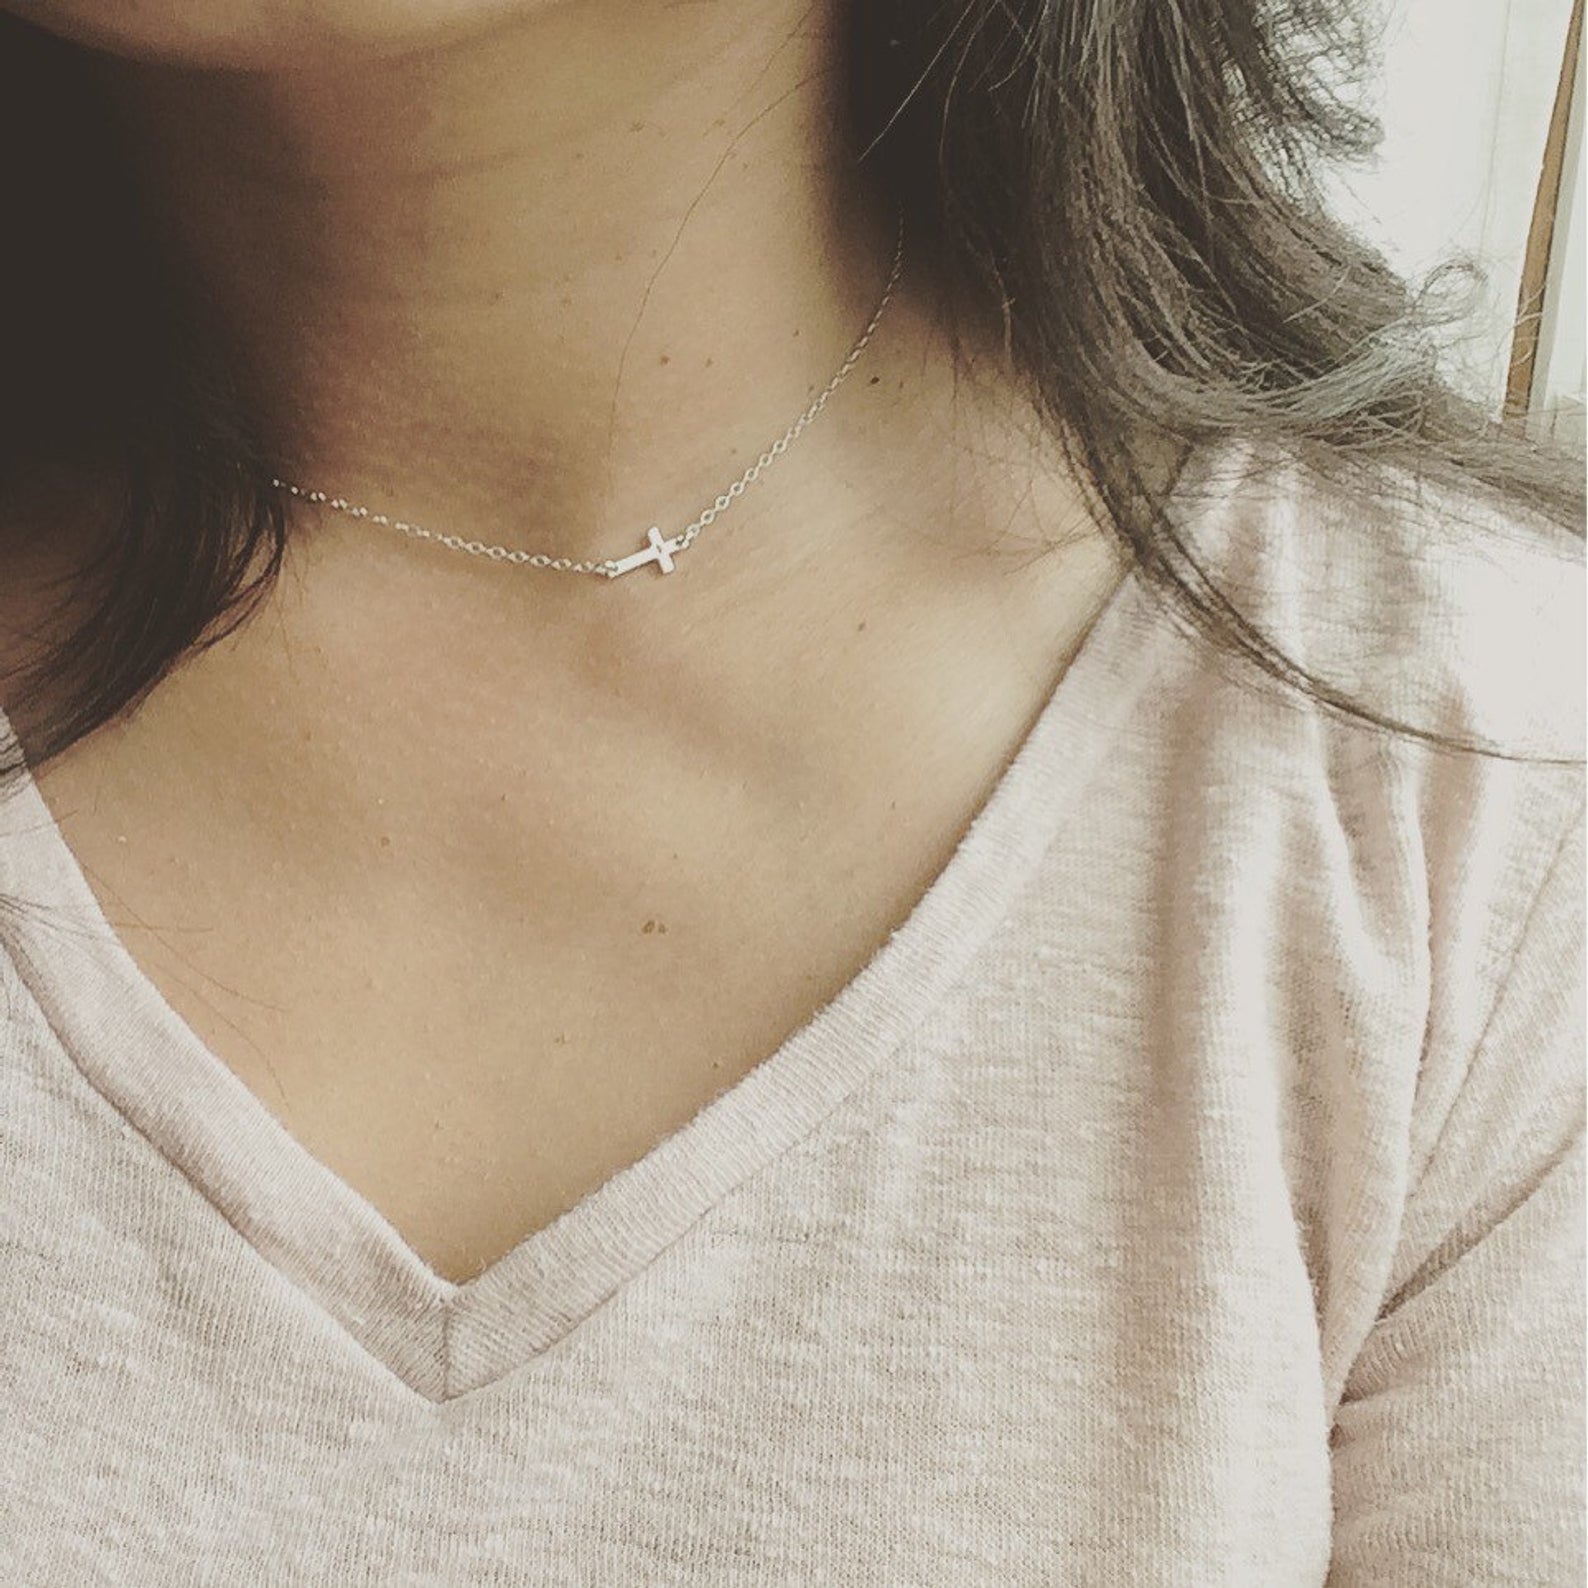 Cross Necklace, Cross Jewelry, Delicate Jewelry, Mothers Gift, Coco Wagner Jewelry, Gift For Her, Gift Ideas,  Birthday Gift, Mothers Gift, Christmas Gift Ideas, Mothers Day Gift  Minimalist Jewelry, Everyday Jewelry, Simple and Dainty